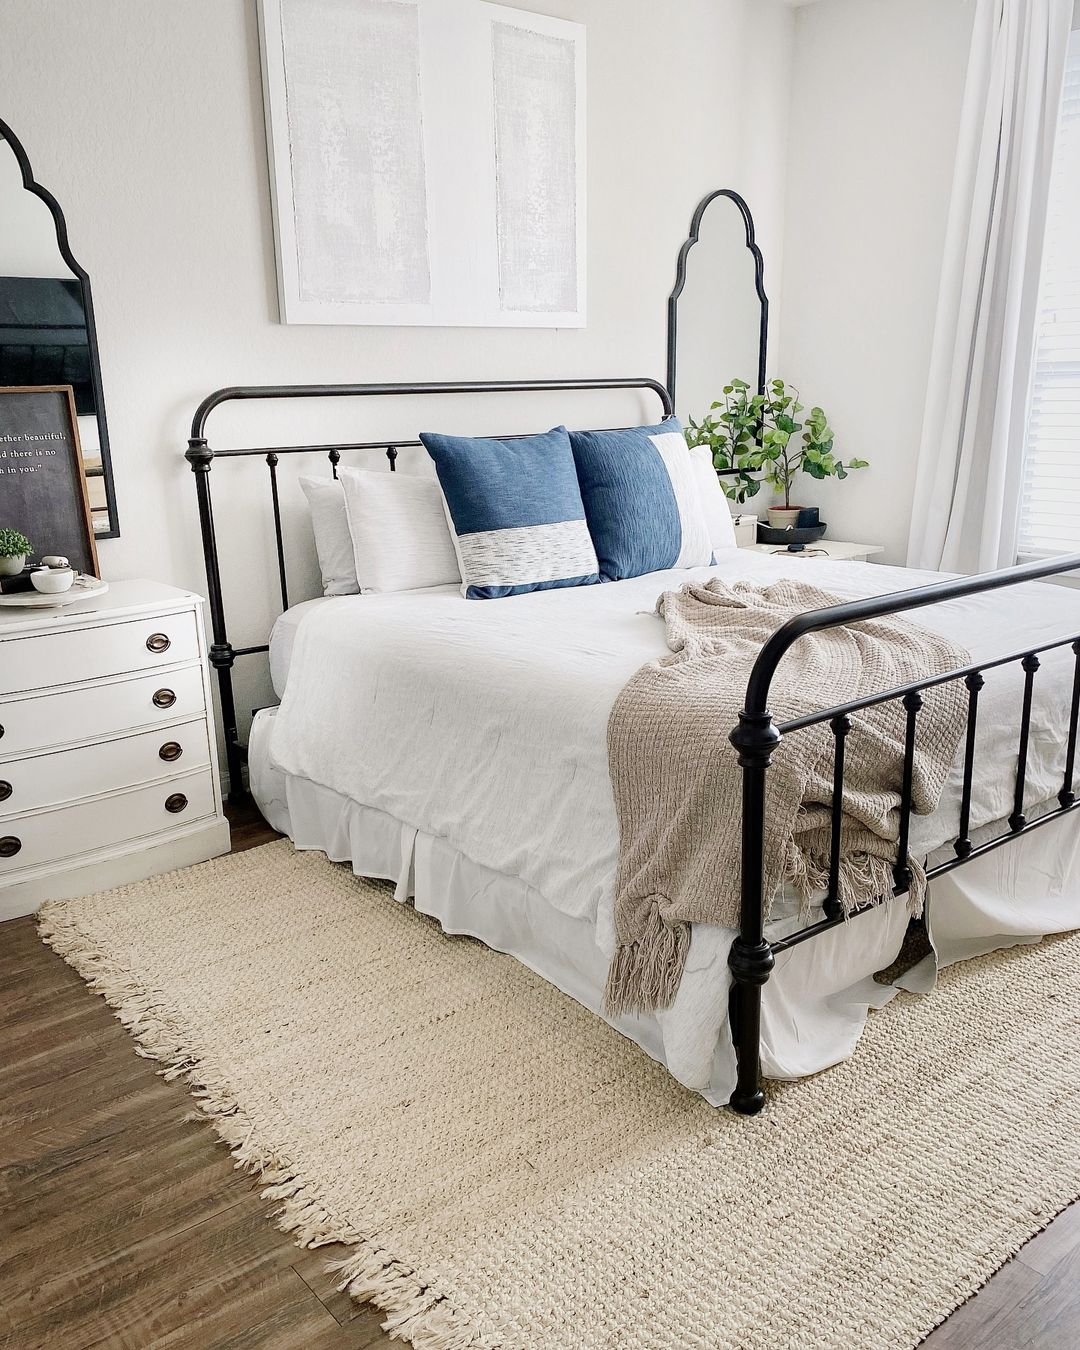 Classic Comfort: Black Metal Bed Frame with Textured Accents